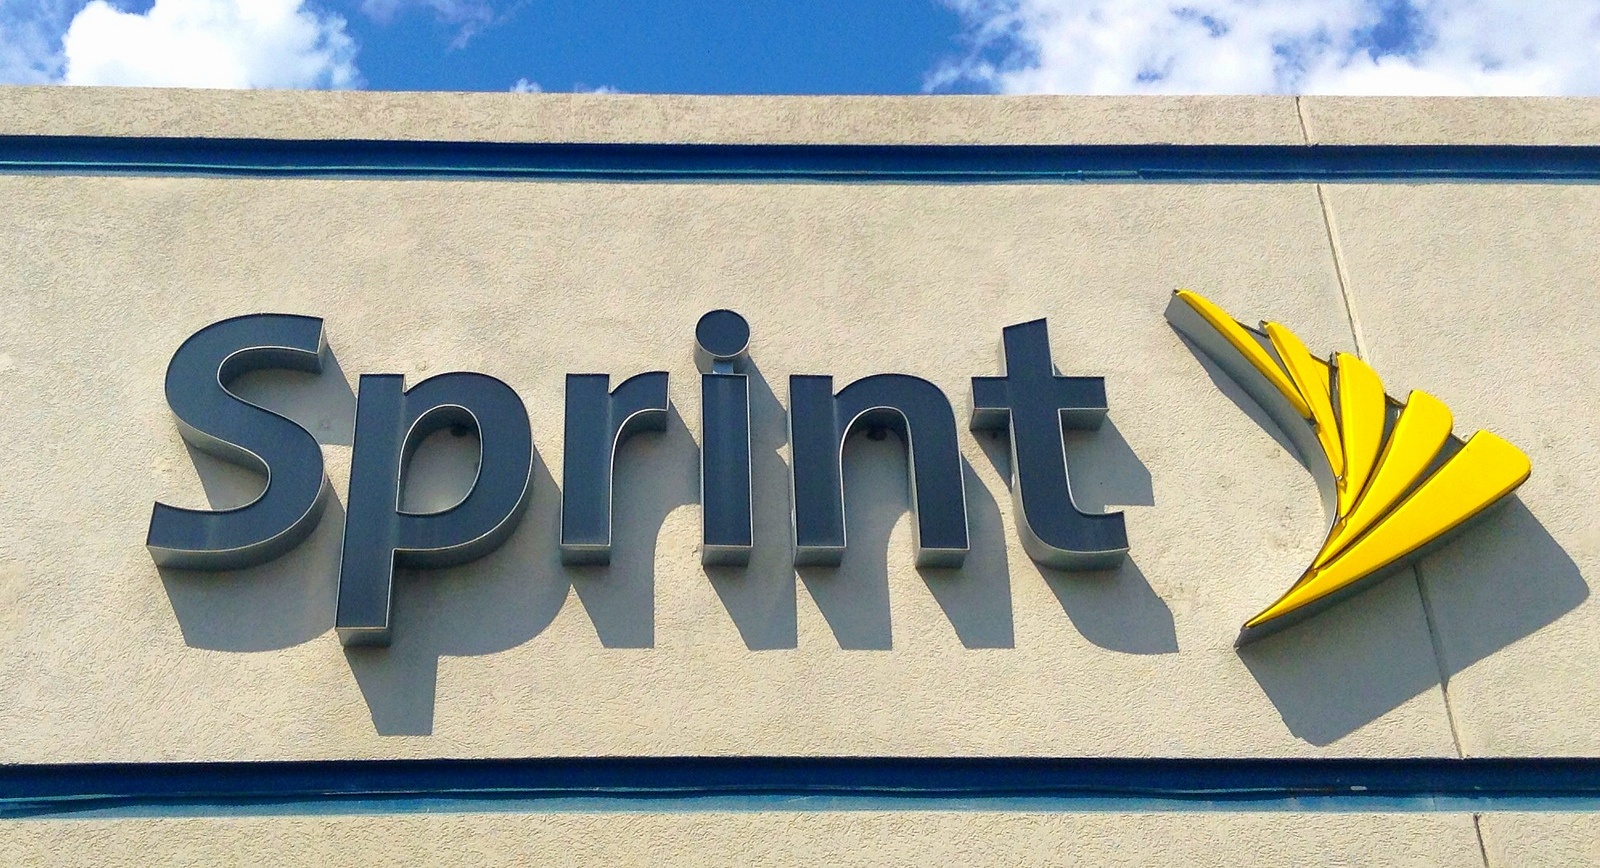 sprint-will-stop-offering-two-year-contracts-to-smartphone-customers-image-cultofandroidcomwp-contentuploads20150814890791433_1f9247f163_h-jpg